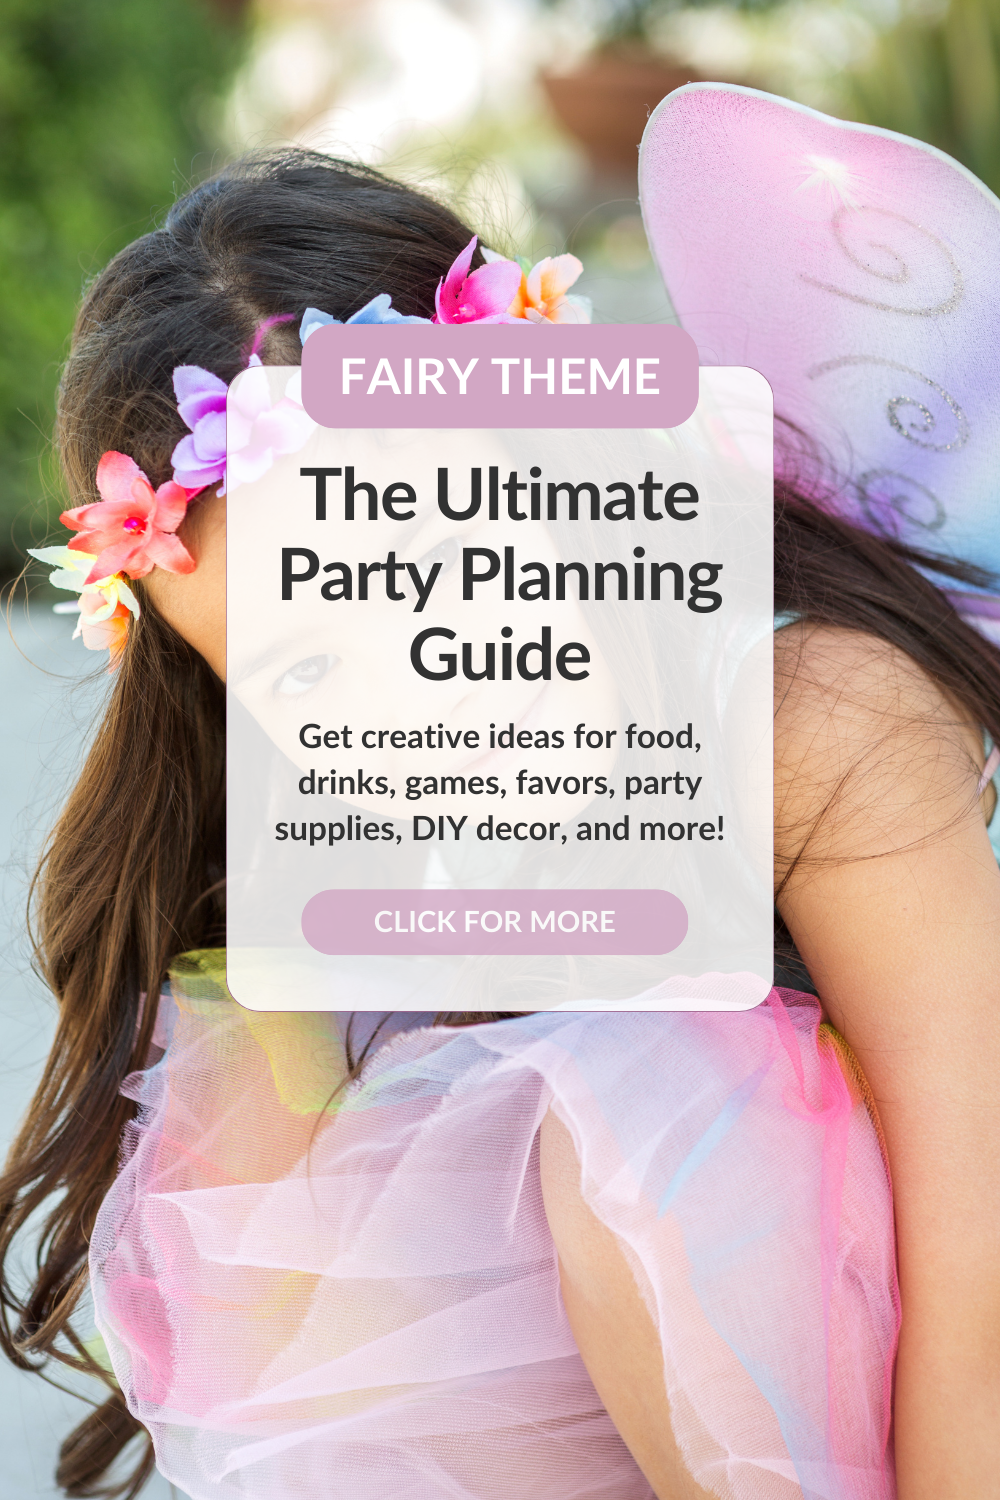 21 Fabulous Fairy Party Ideas and Detailed Party Planning Guide on www.prettymyparty.com. Get creative ideas for food, games, favors, decor, DIY ideas, and more.